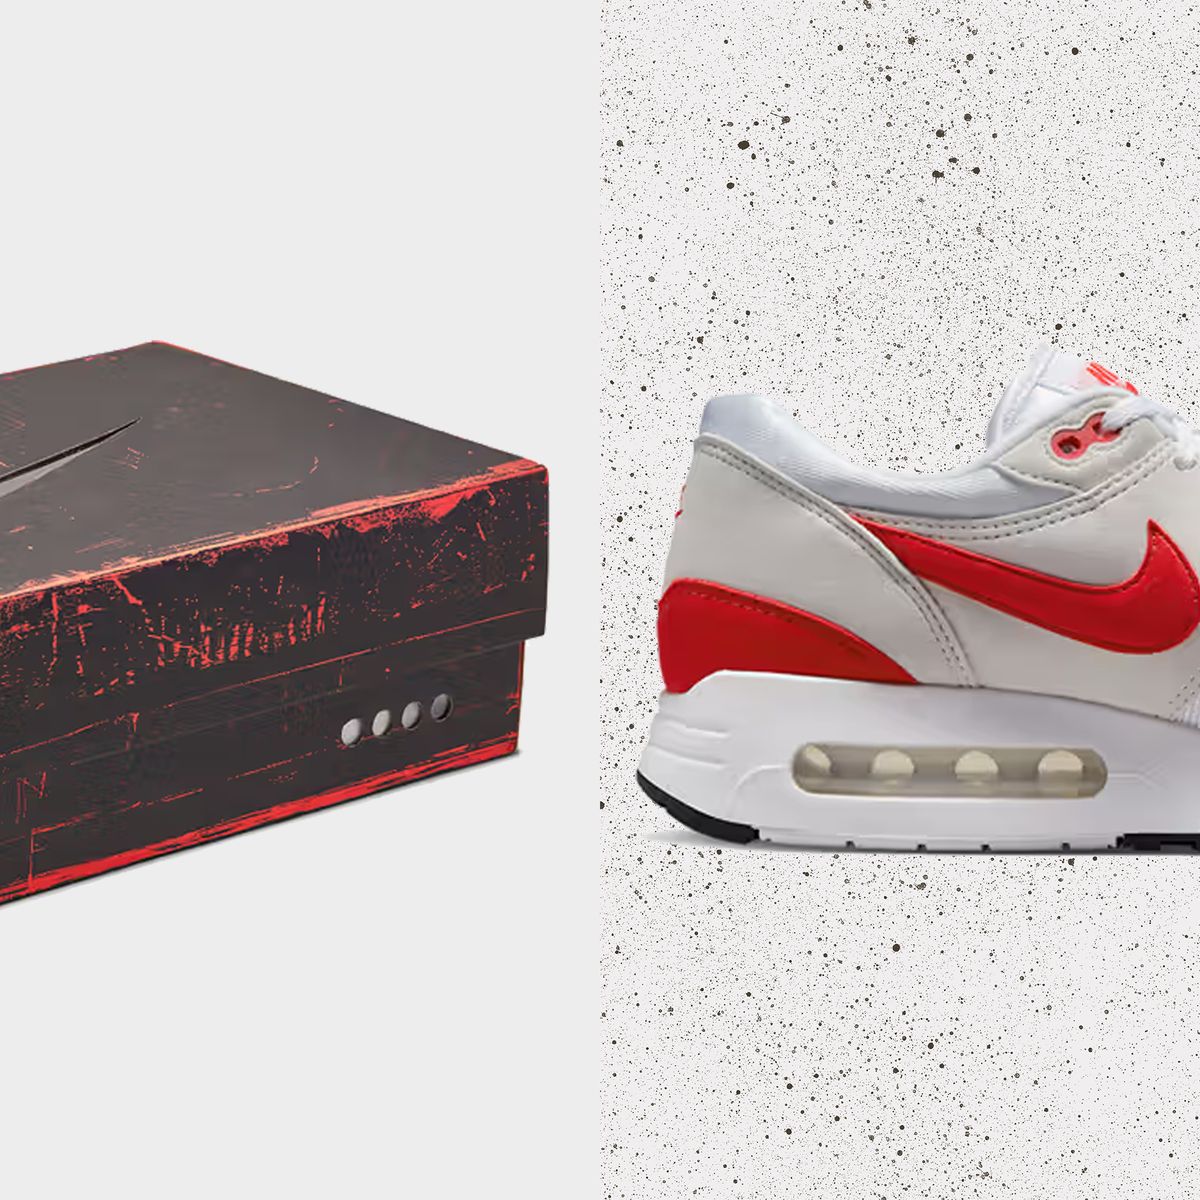 Air Max Day 2023: What You Need to Know About the Nike Event